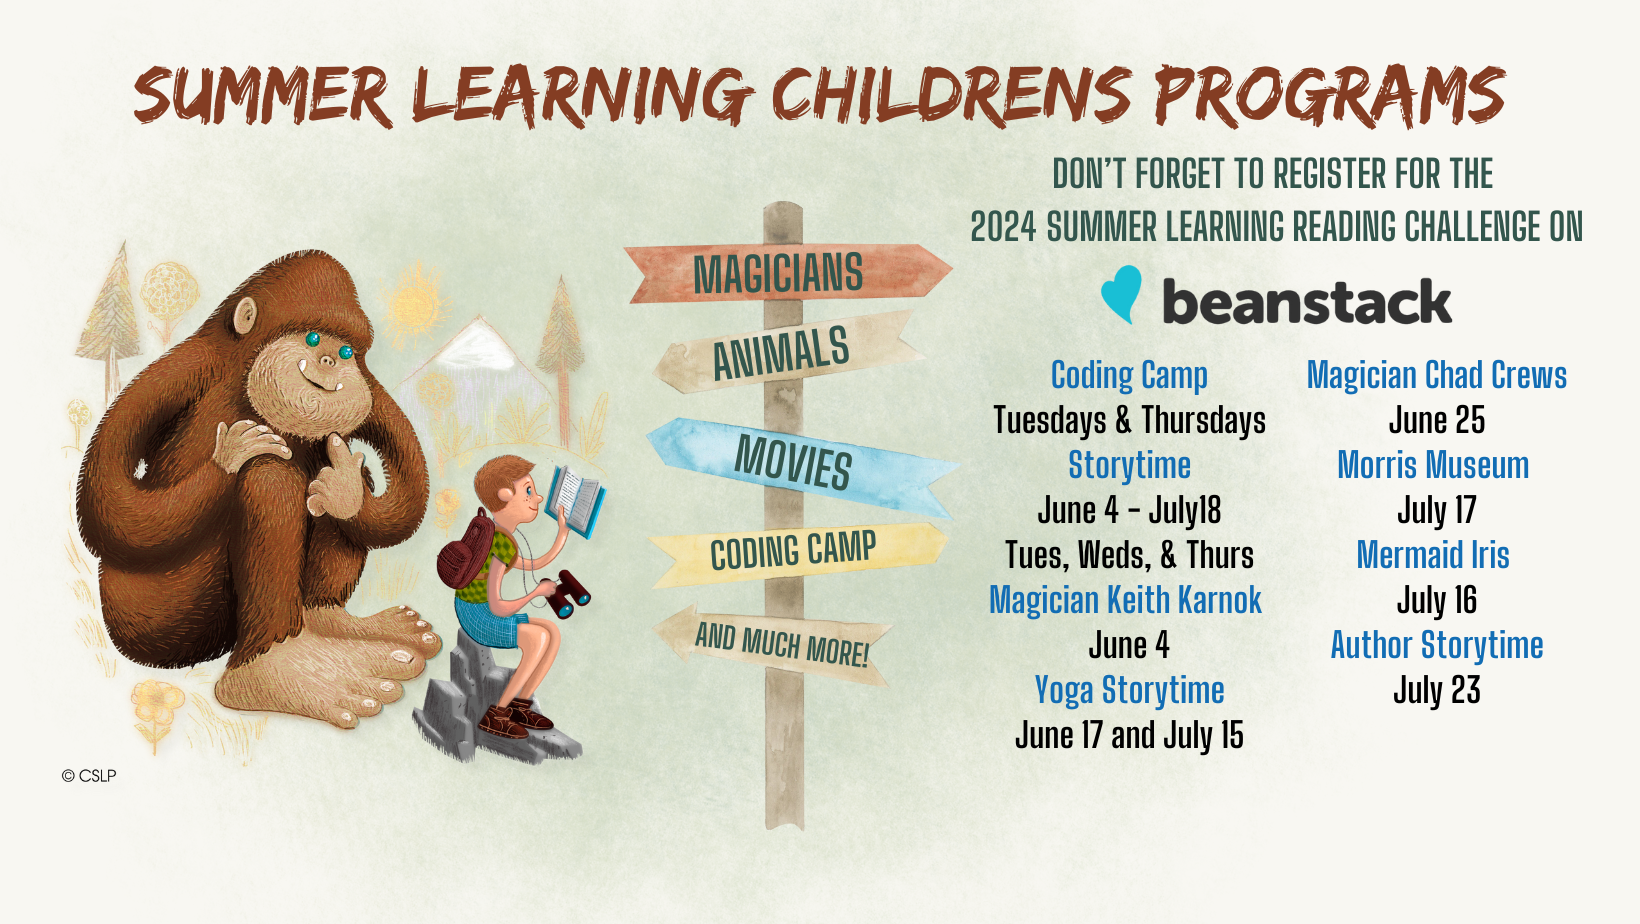 Summer Learning Children's Programs. Don't forget to register for the 2024 Summer Learning Reading Challenge on Beanstack. Coding Camp -- Tuesdays & Thursdays. Storytime -- June 4 - July 18, Tuesday, Wednesday, and Thursday. Magician Keith Karnok -- June 4. Yoga Storytime -- June 17 and July 15. Magician Chad Crews -- June 25. Morris Museum -- July 17. Mermaid Iris -- July 17. Author Storytime -- July 23.